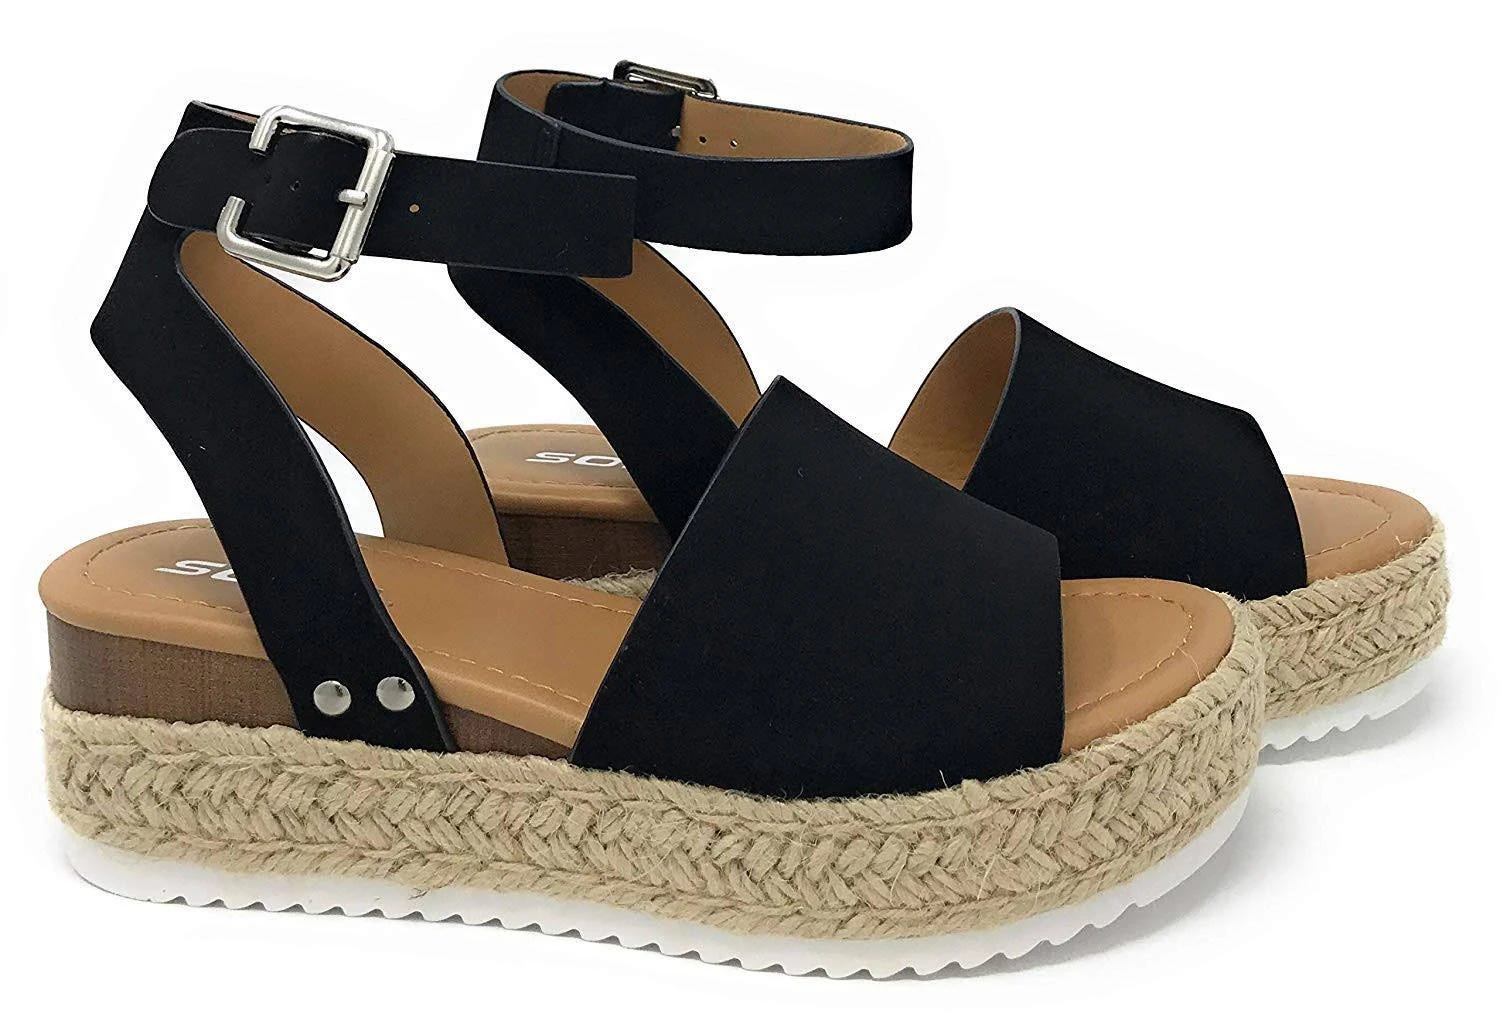 Sleek Black Espadrilles with Ankle Strap and Studded Wedge | Image